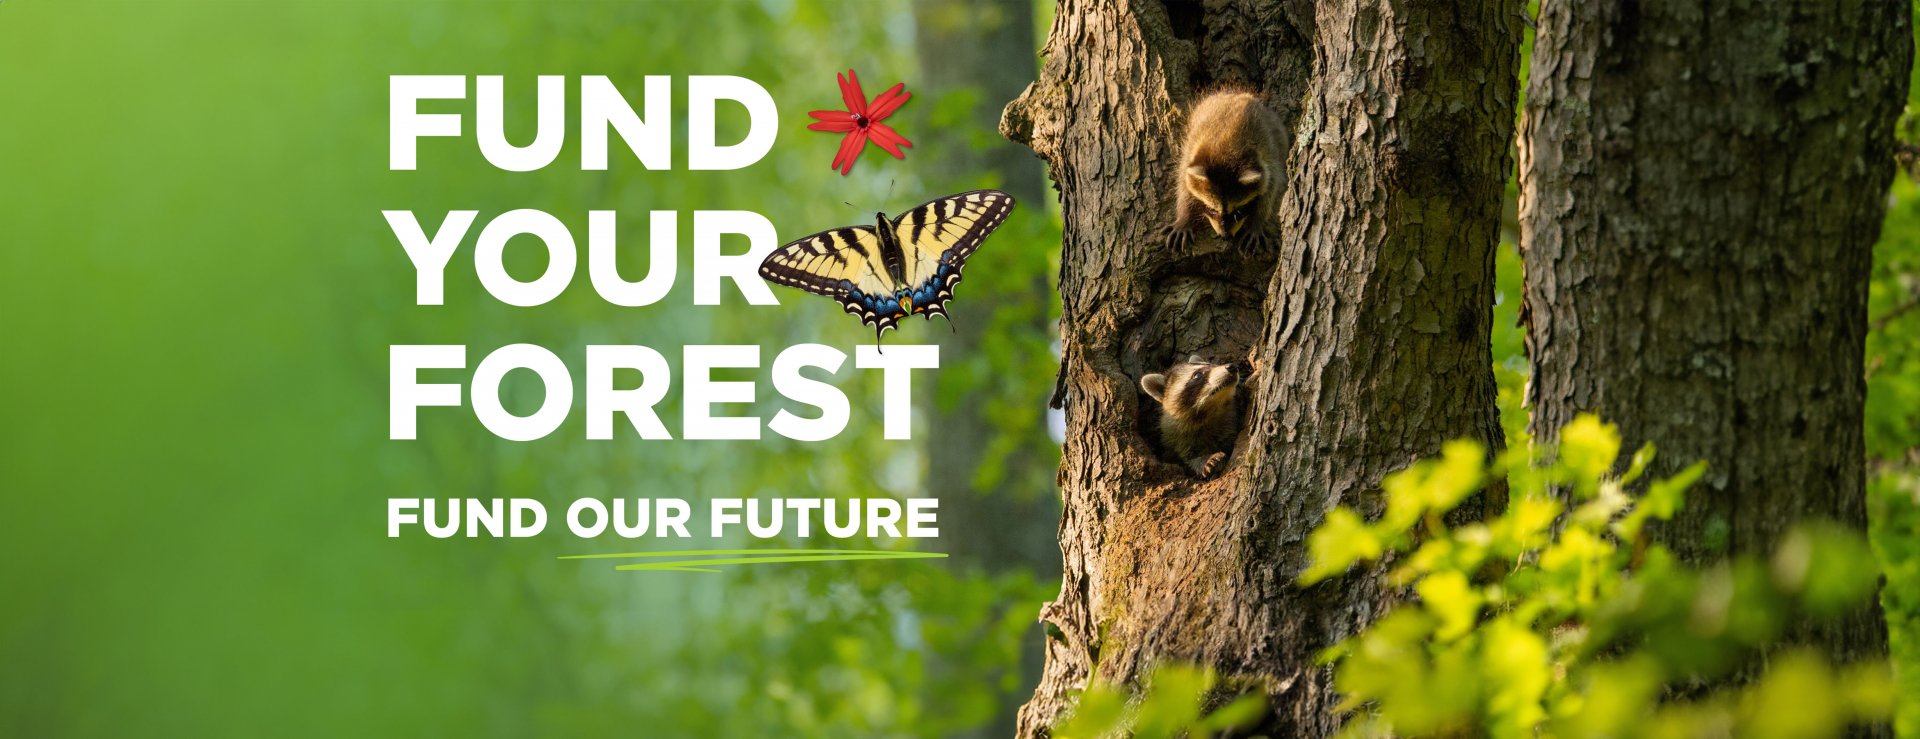 A tree with baby raccoons, a red flower, and butterfly surround the words "Fund Your Forest. Fund Our Future".